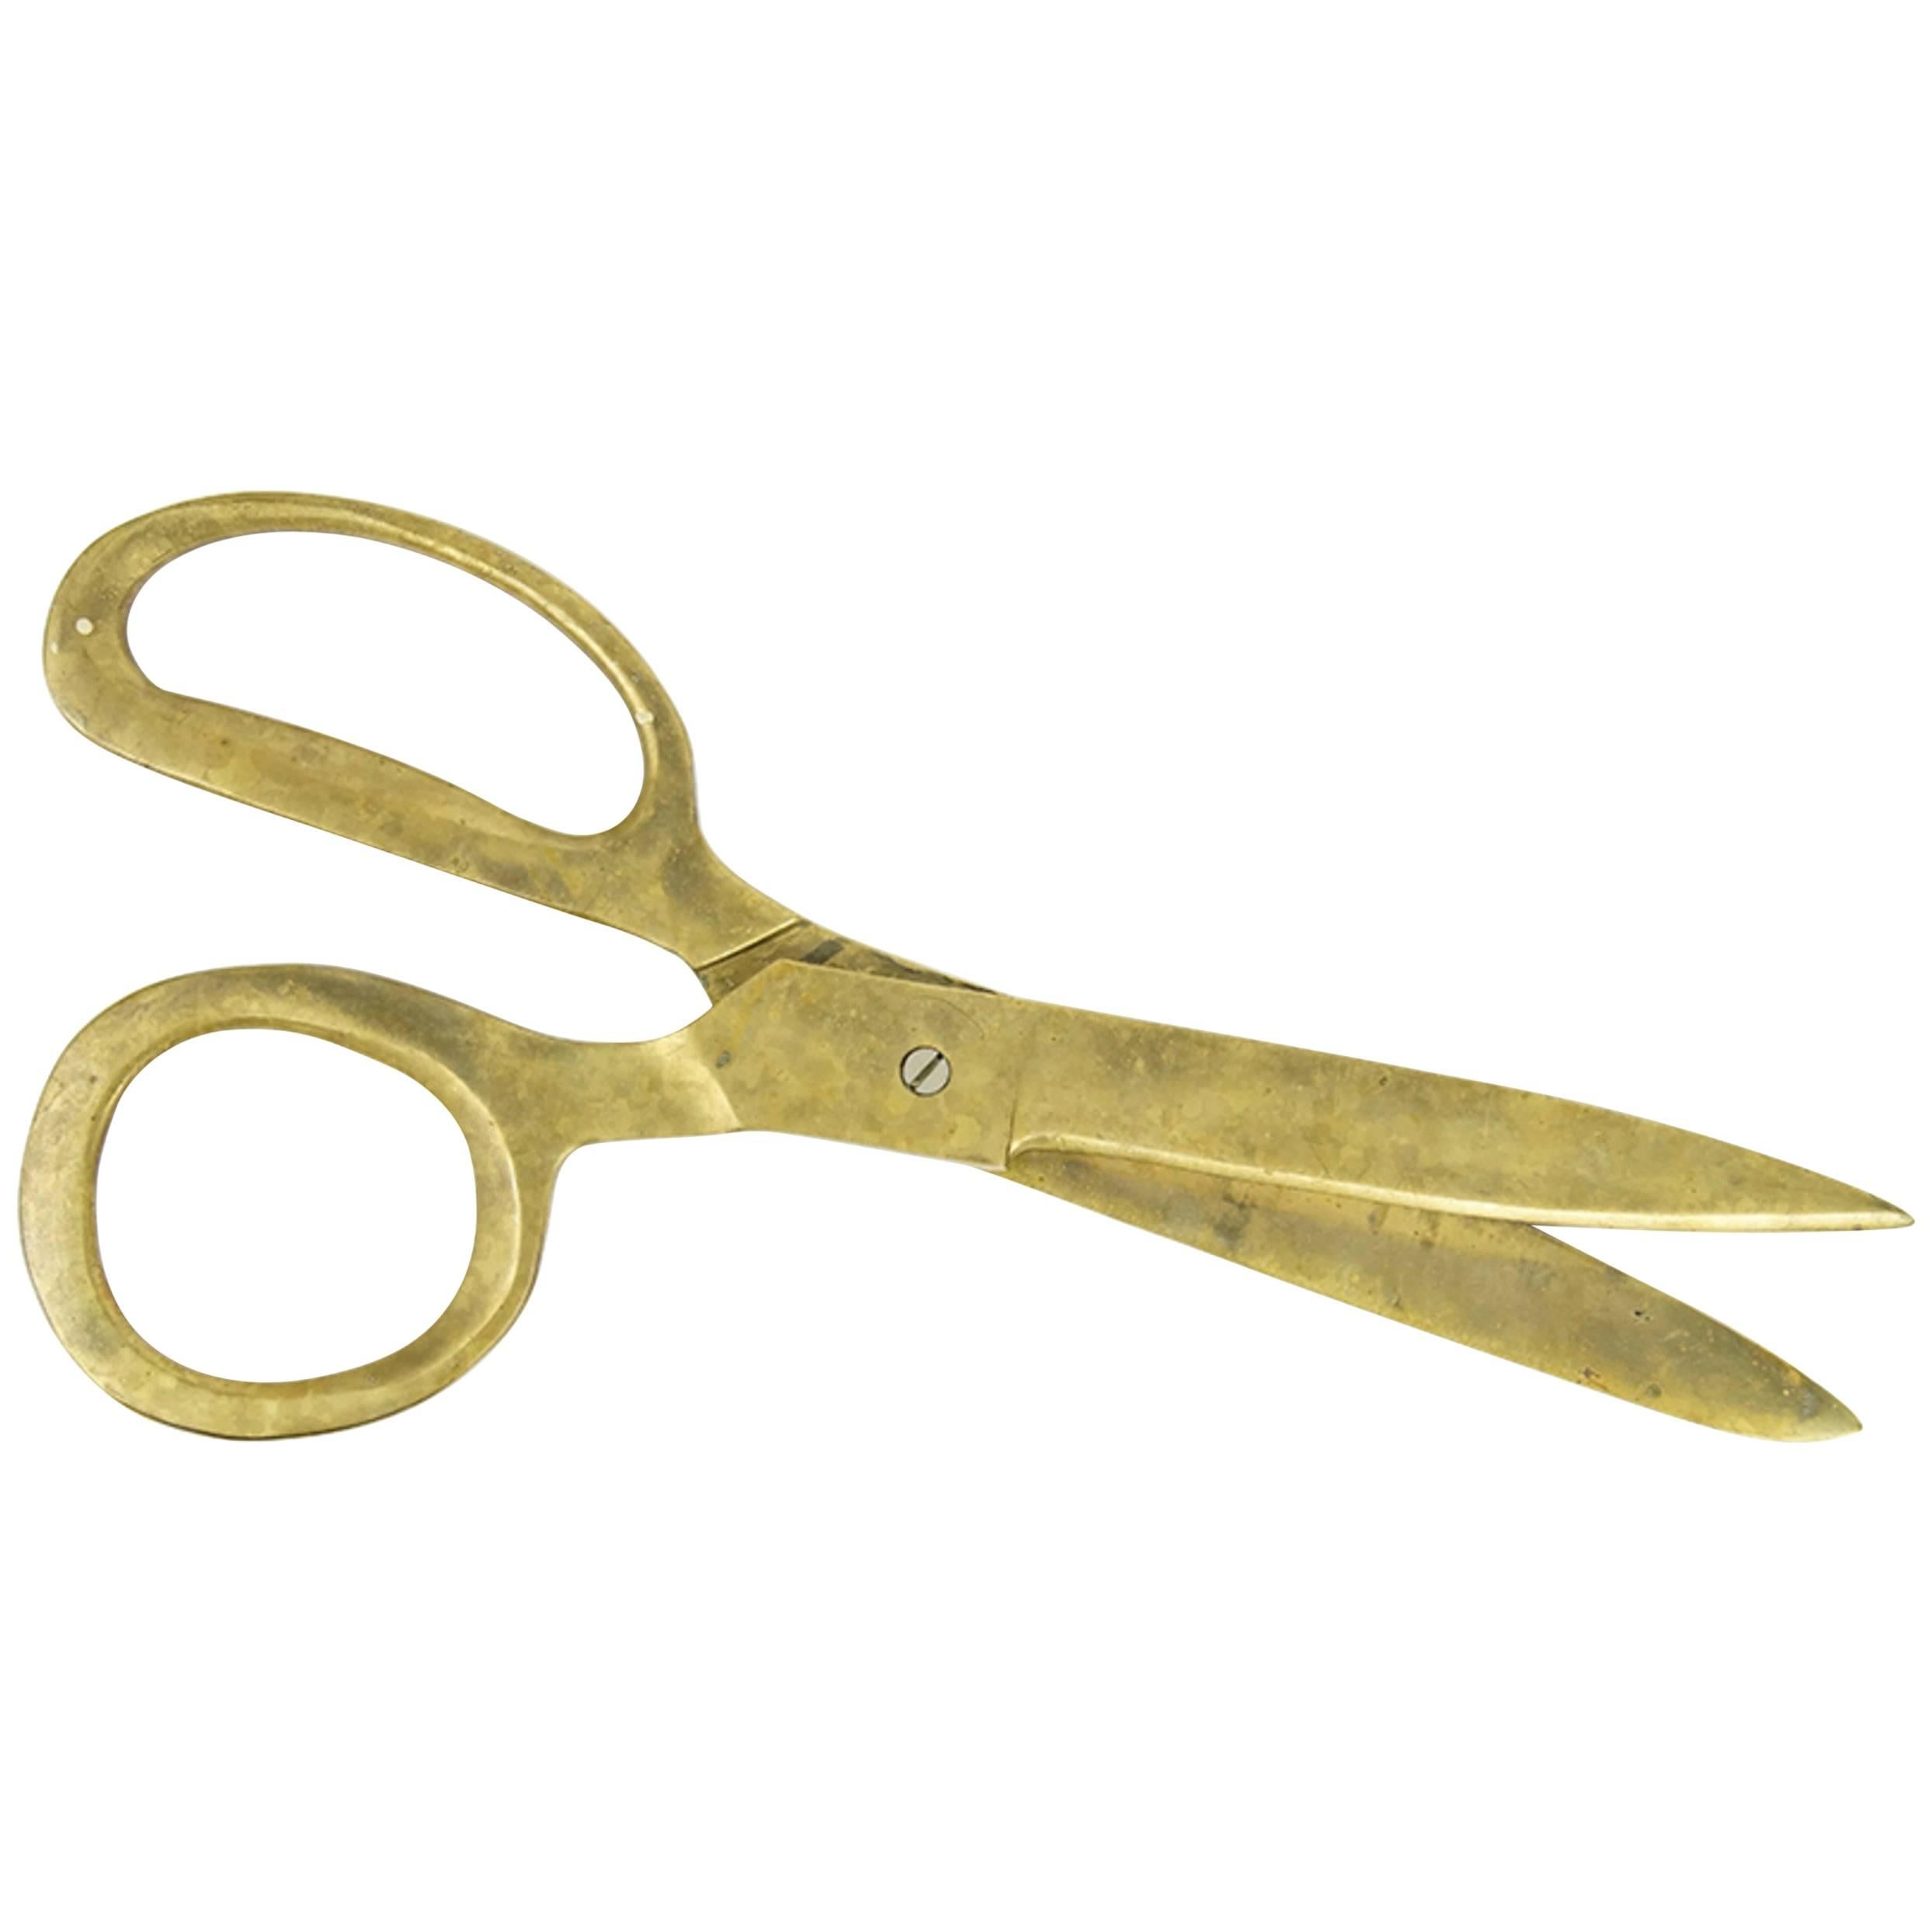 Monumental Pair of Brass Scissors in the Style of Carl AuböCk, Unsigned, Hinged